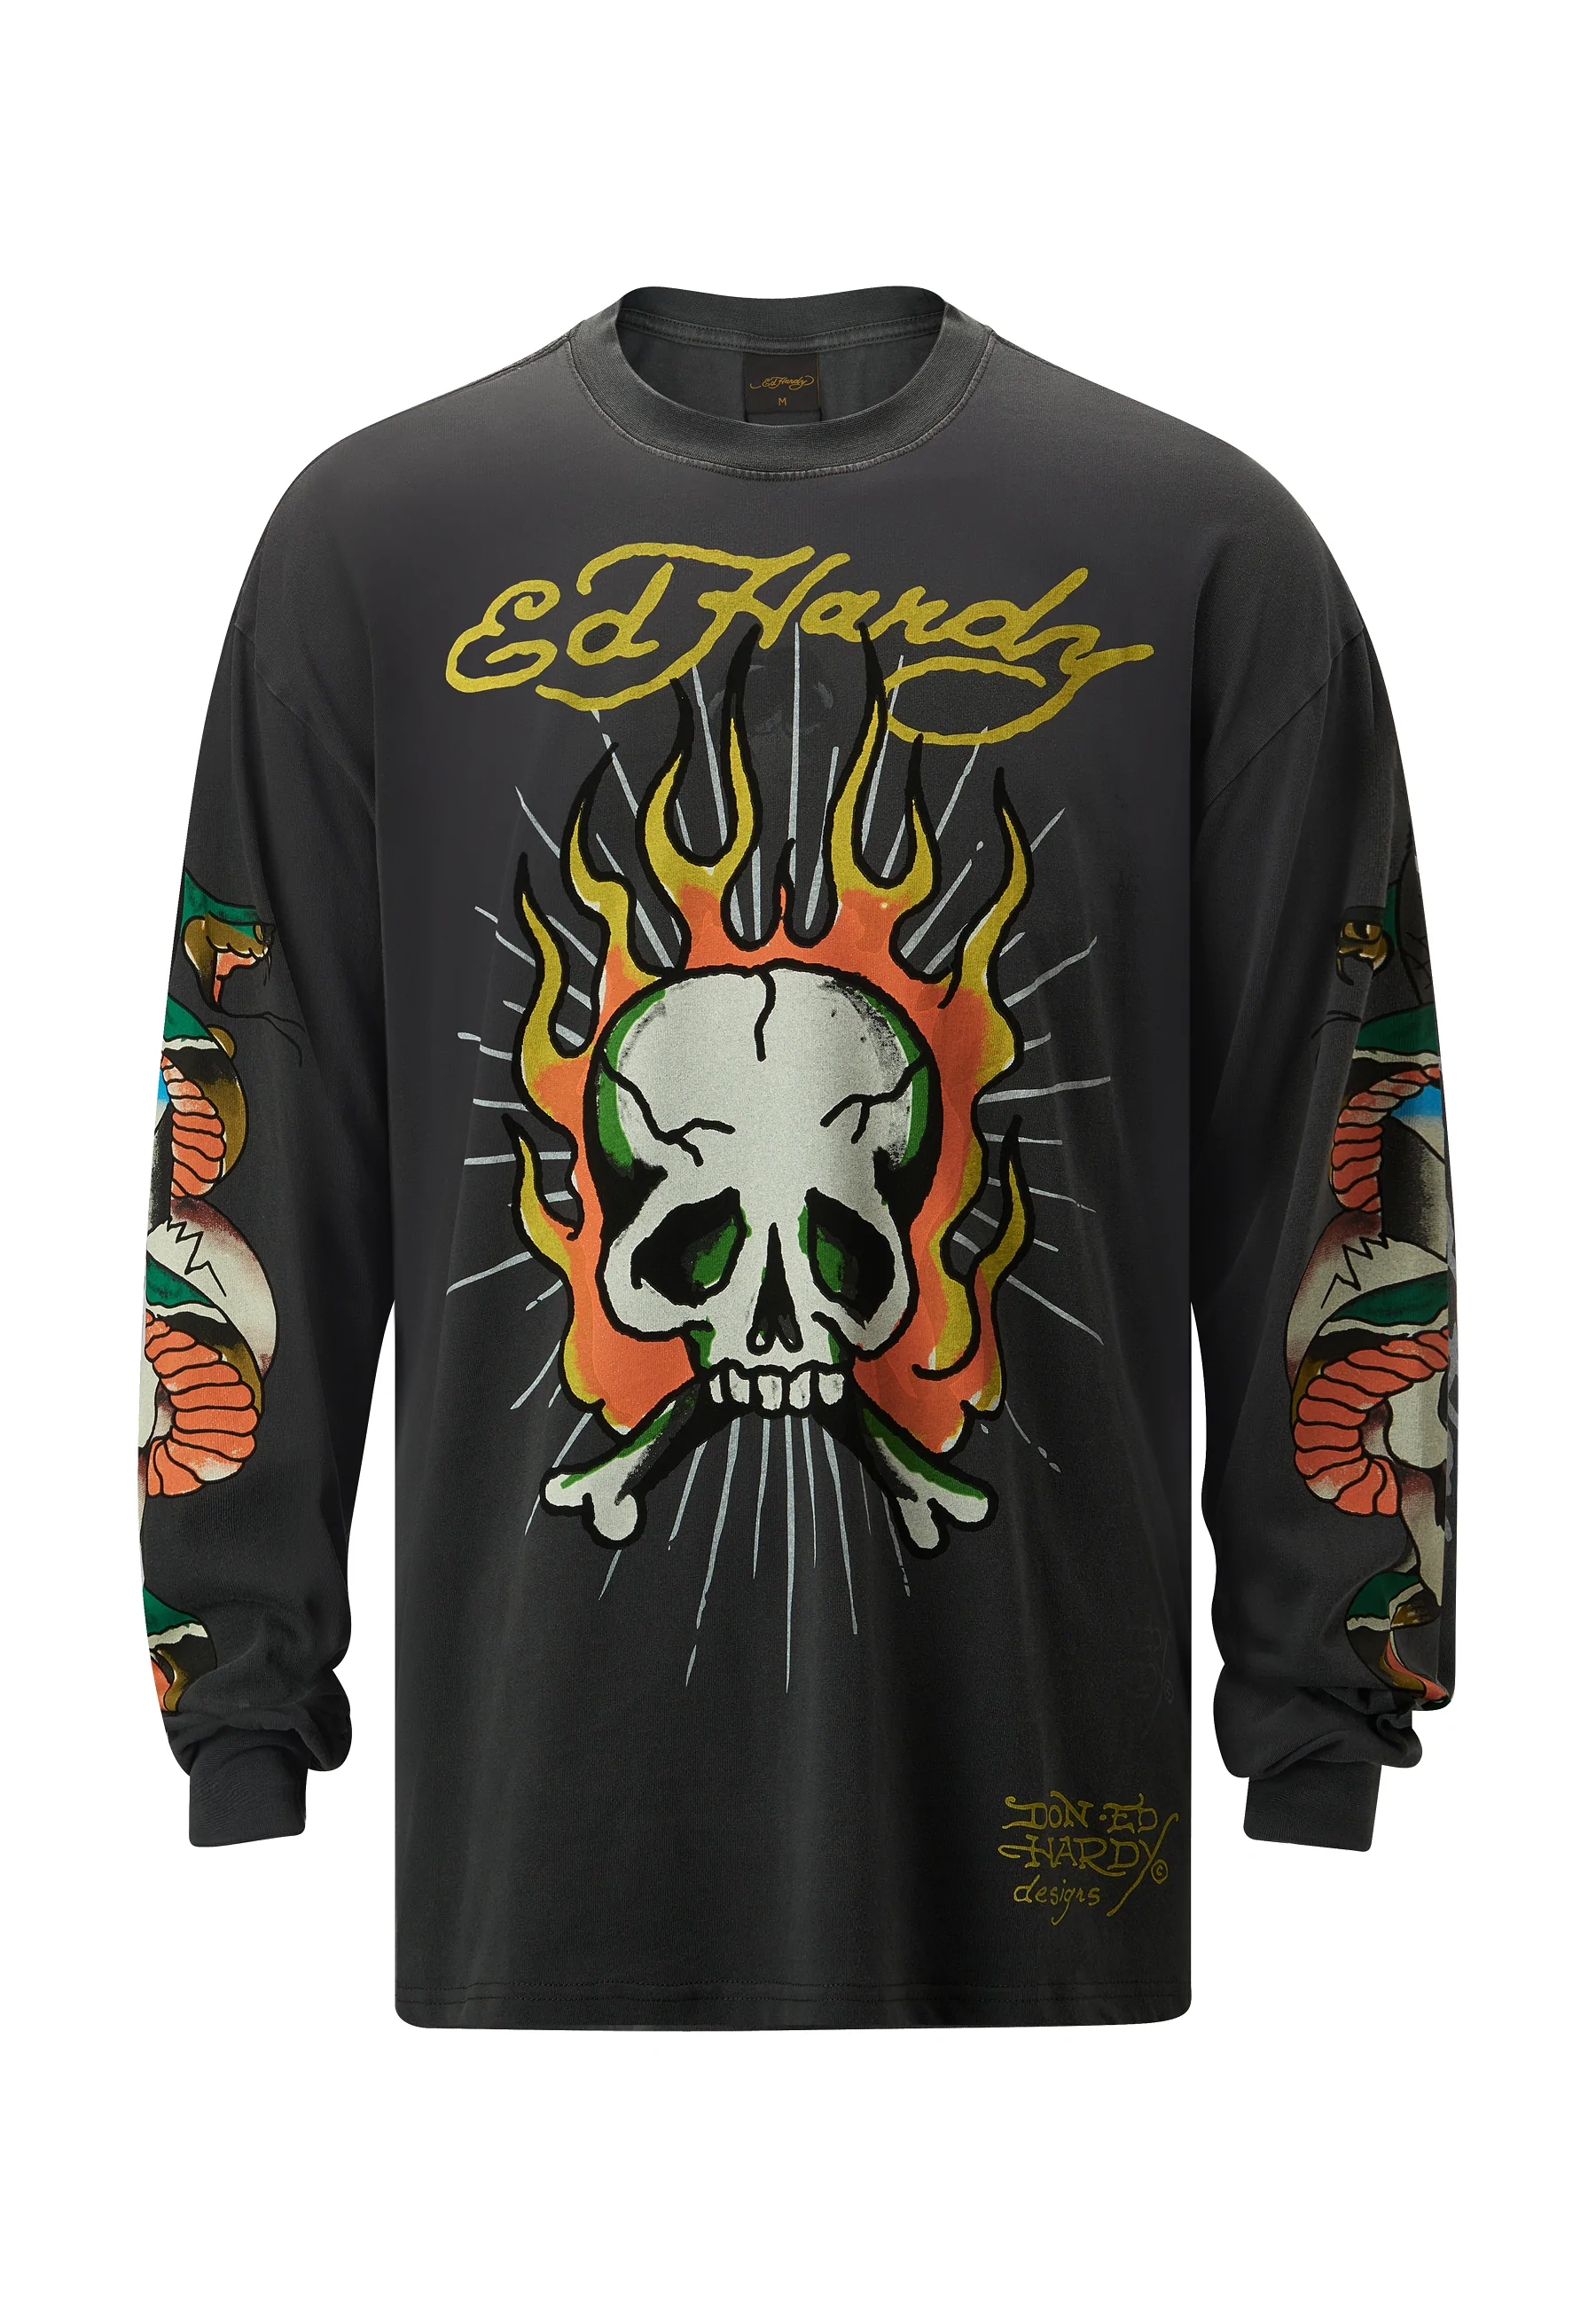 Official Ed Hardy Merch Store Flame Skull Tee EdHardy Apparel